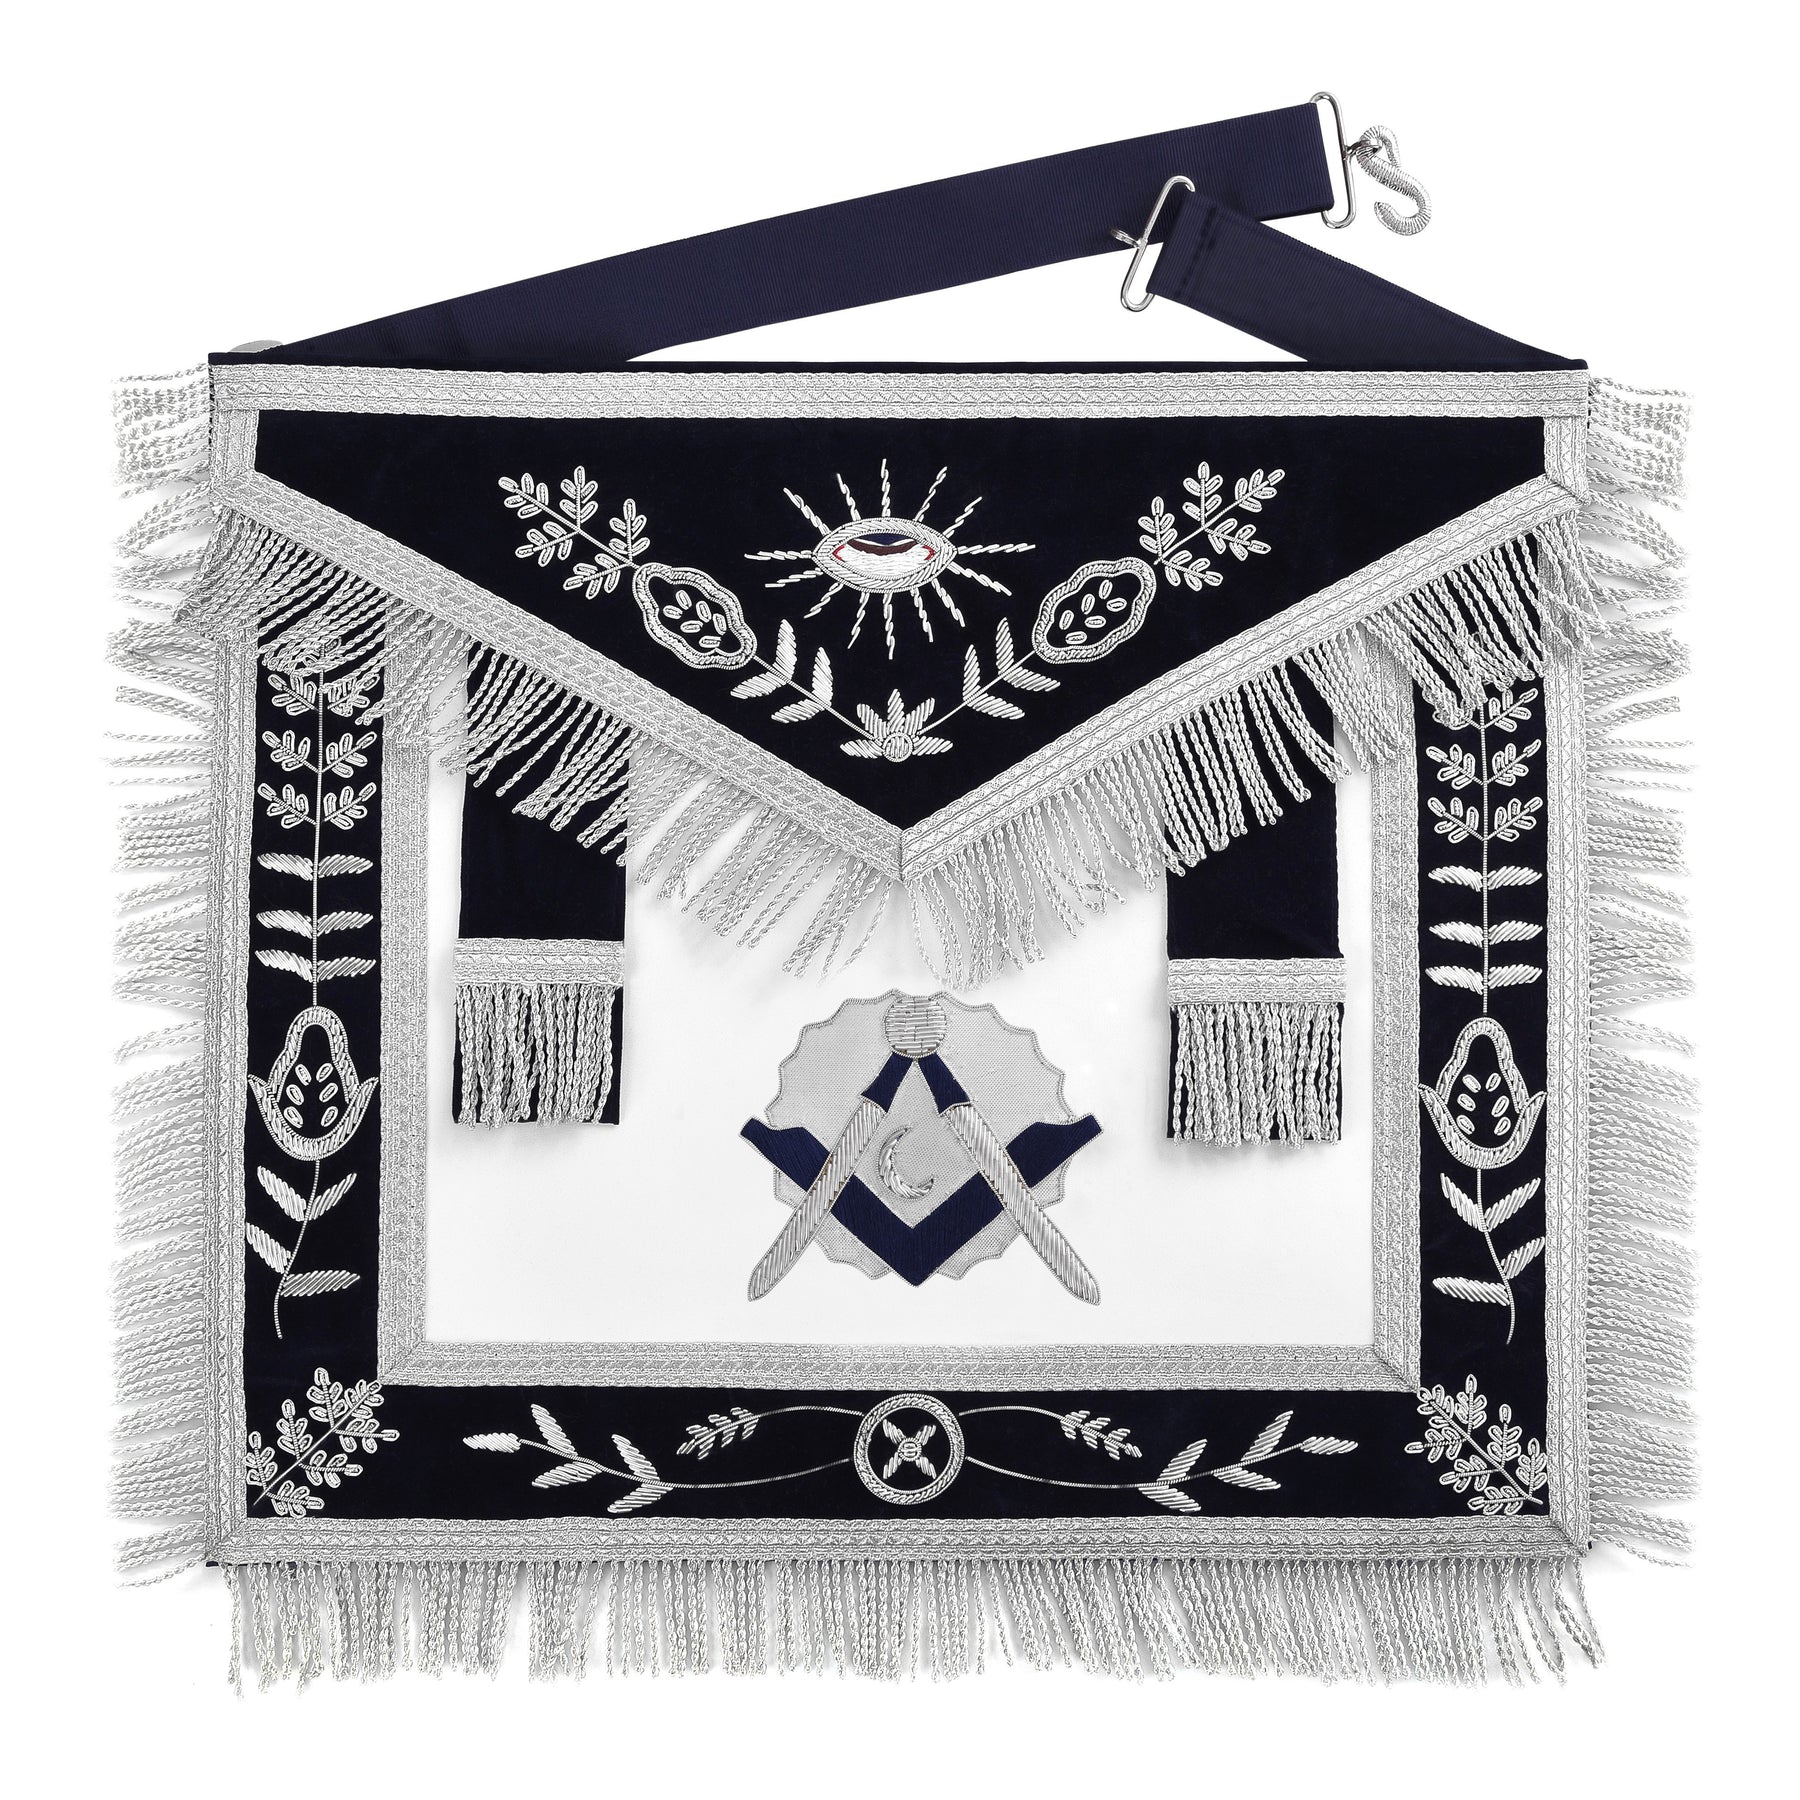 Junior Deacon Blue Lodge Officer Apron - Dark Blue With Silver Hand Embroidery Bullion